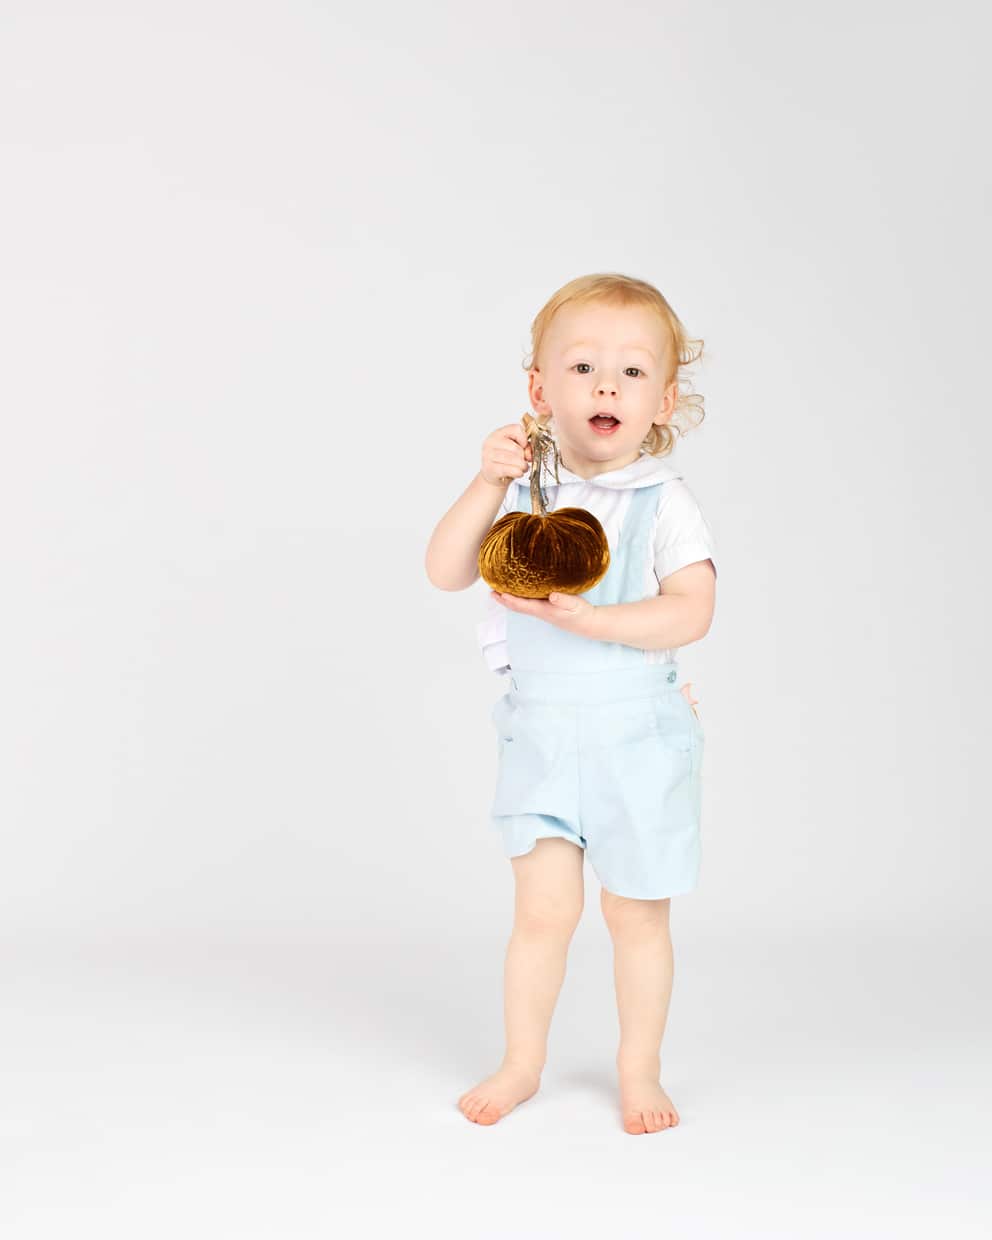 Little boy posing for holiday photos in dallas studio session